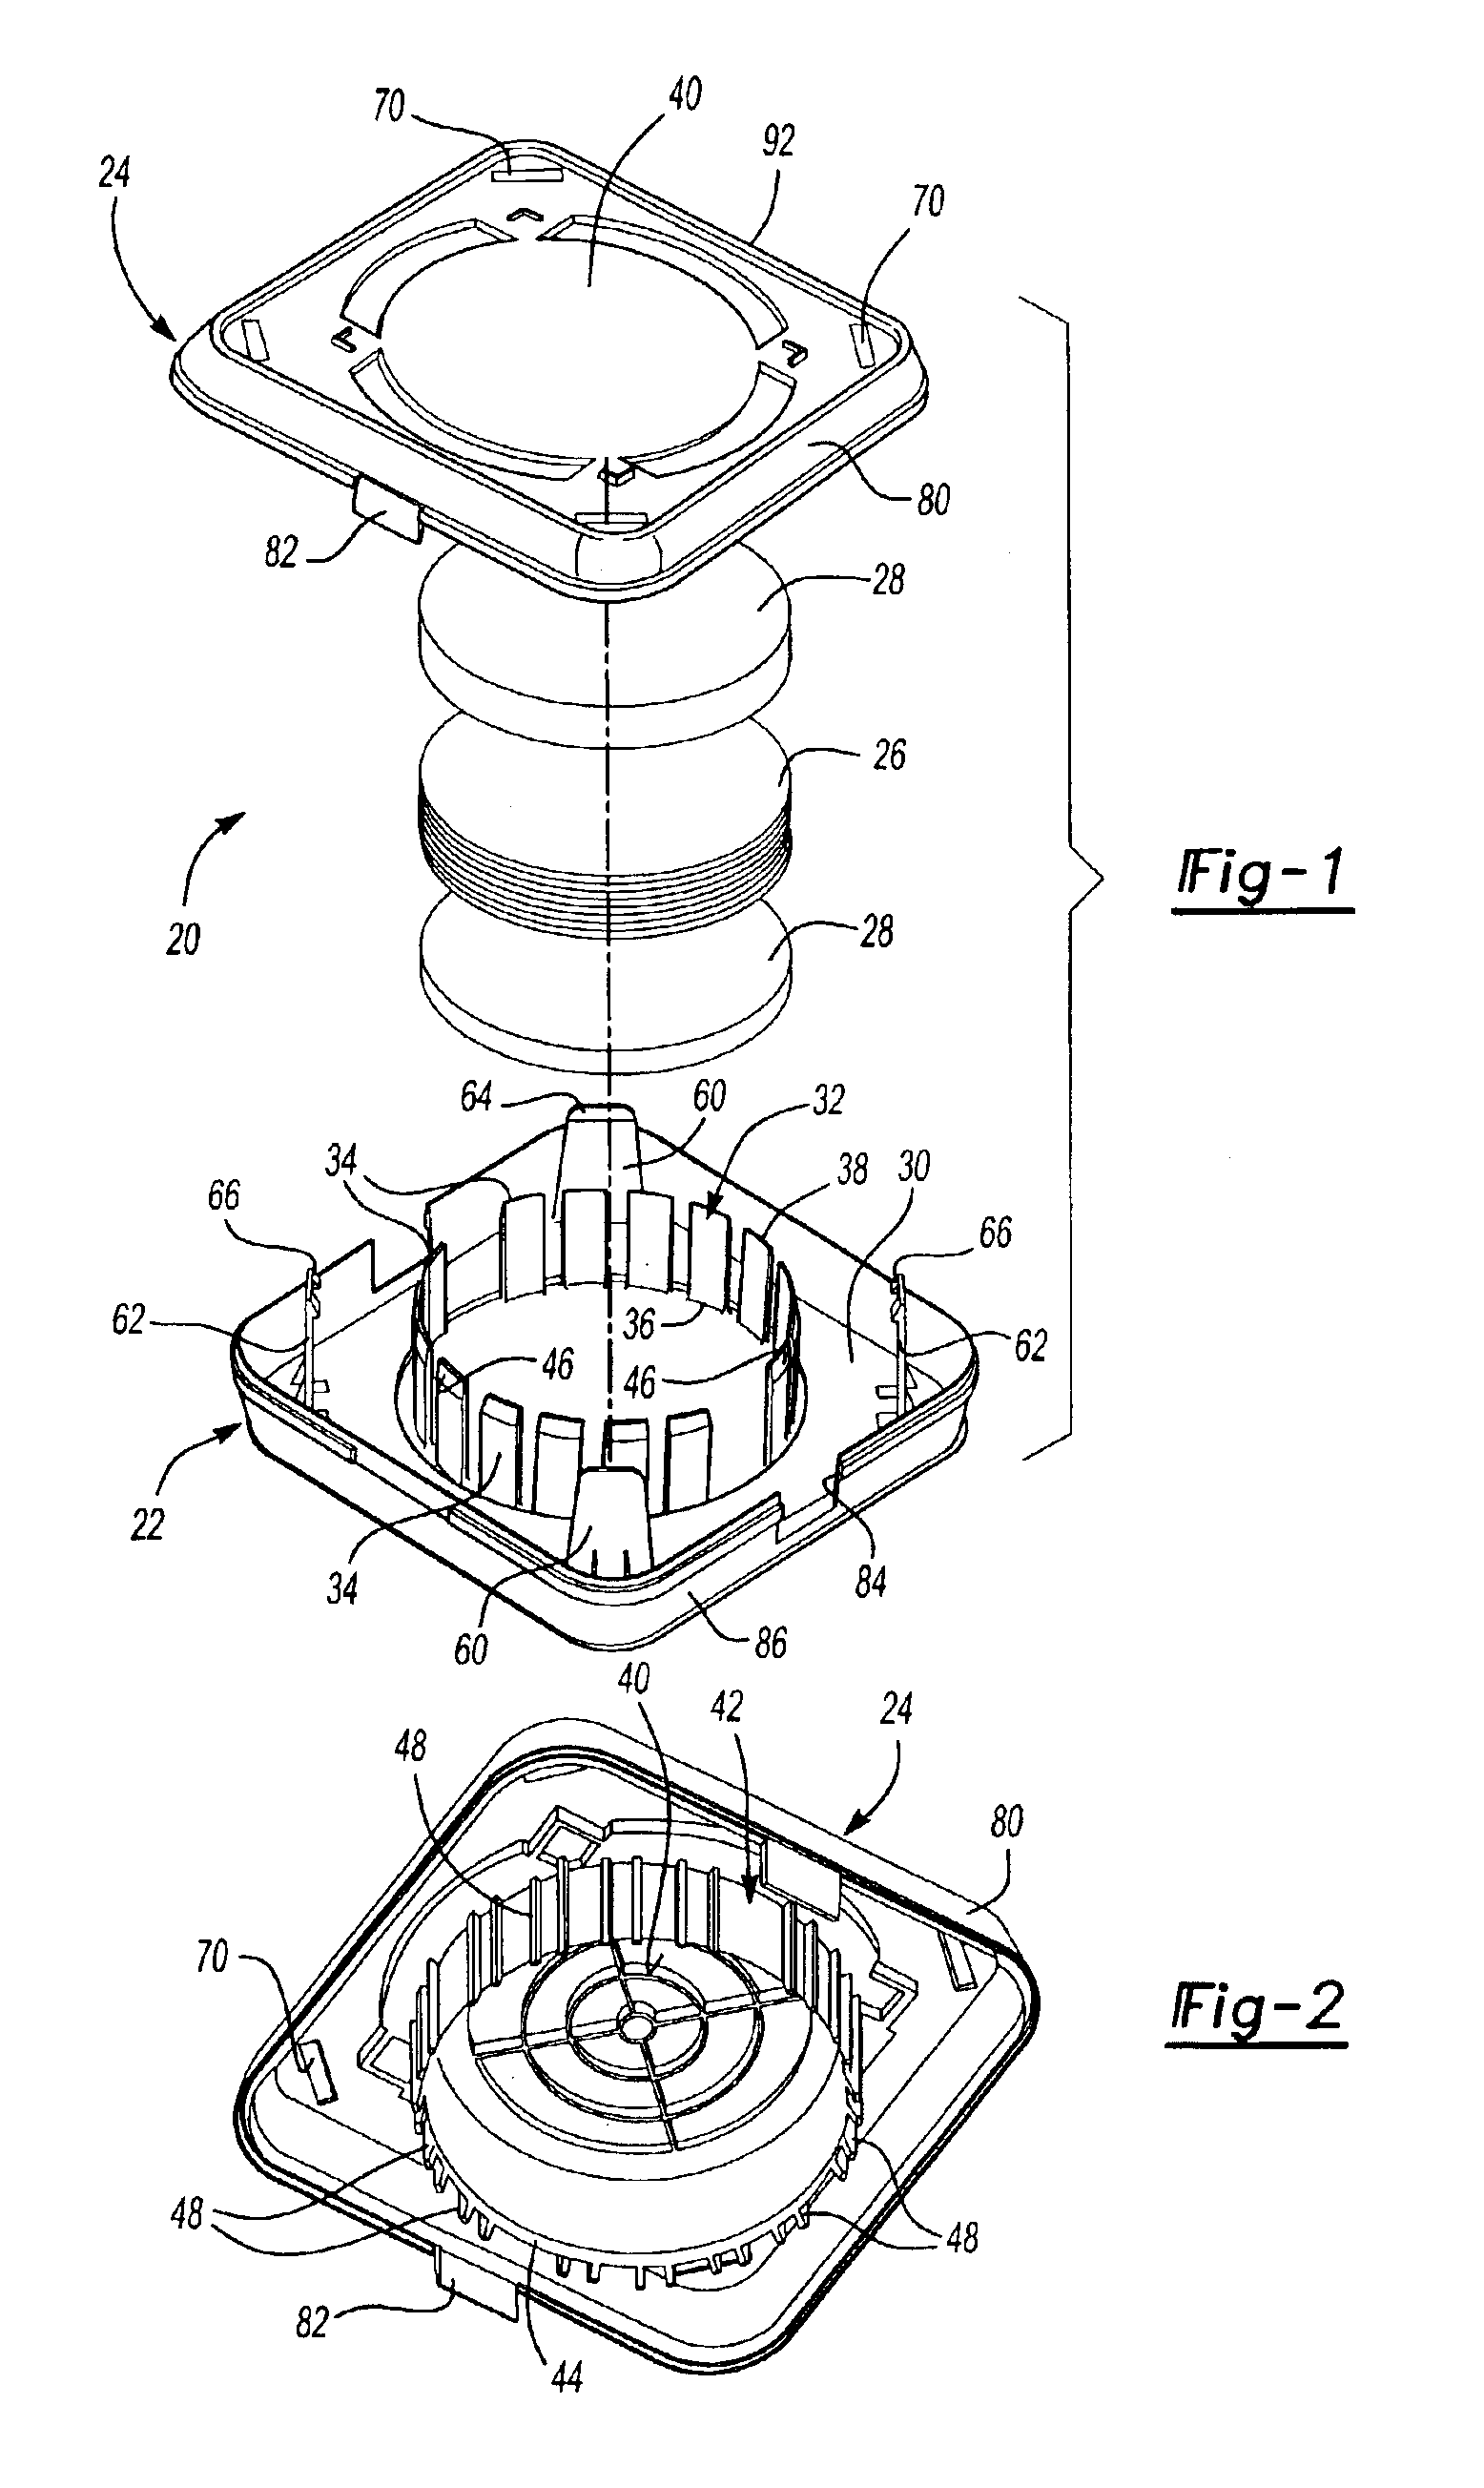 Container with an adjustable inside dimension that restricts movement of items within the container